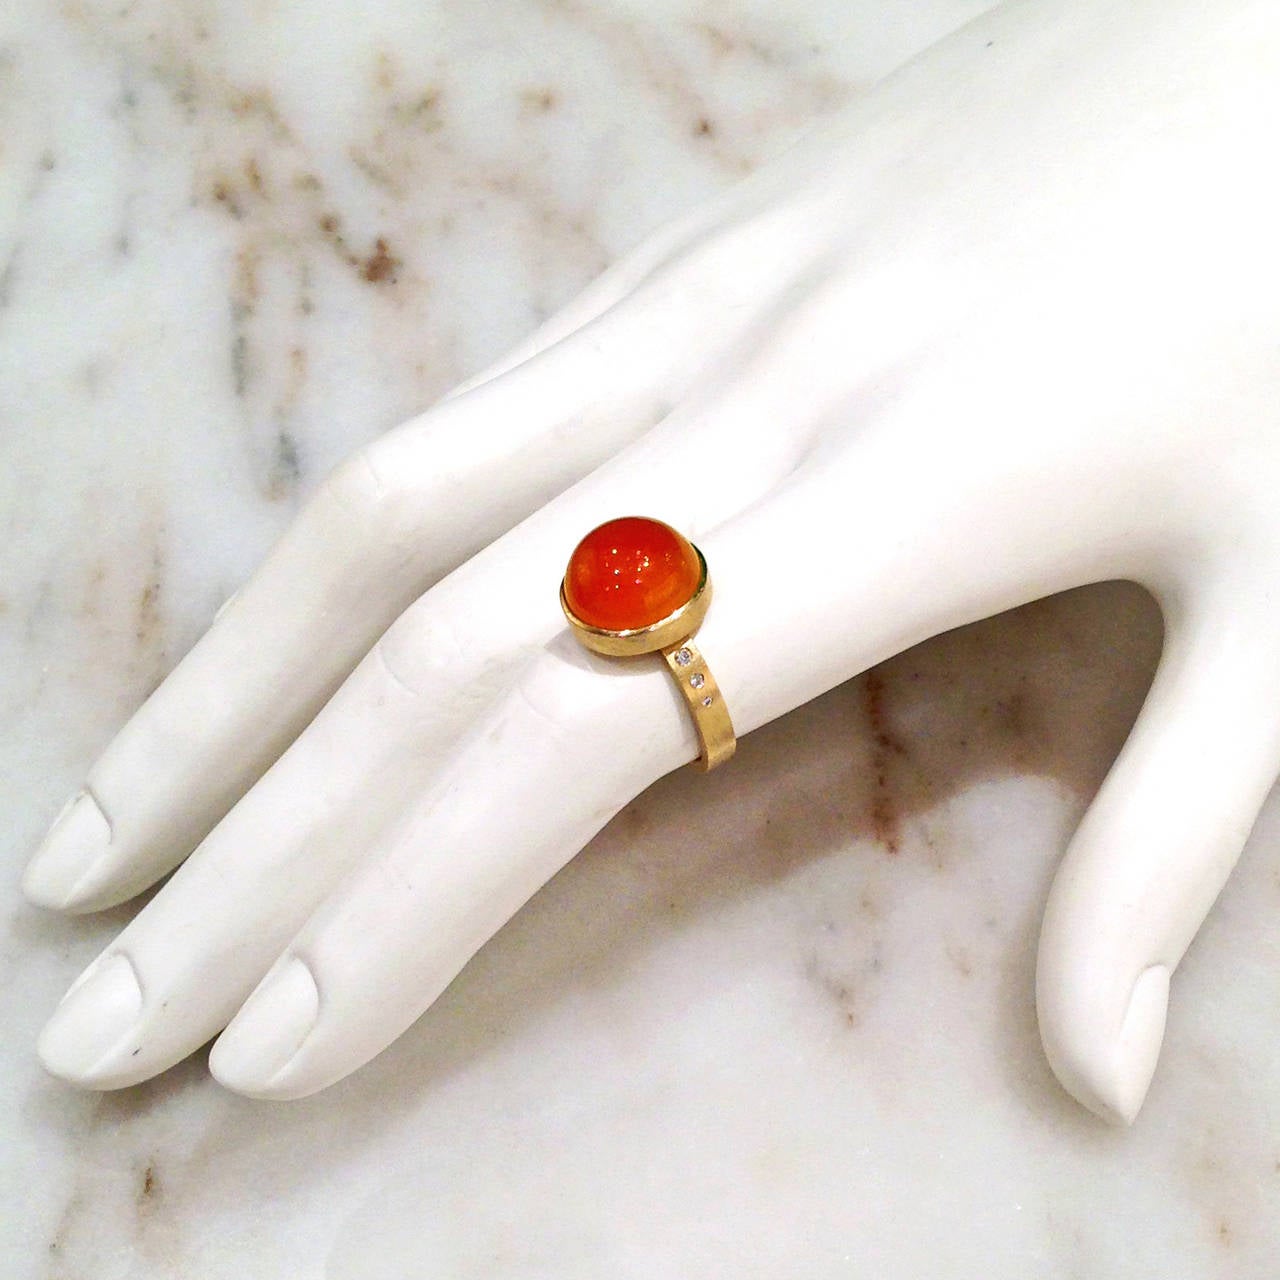 One-of-a-Kind Button Ring handcrafted in 18k yellow gold by the award-winning  jewelry artist, Robin Waynee. The ring features a 7.56 carat cabochon-cut tangerine chalcedony and 0.05 carats of ascending bezel-set vs1 white diamonds perfectly